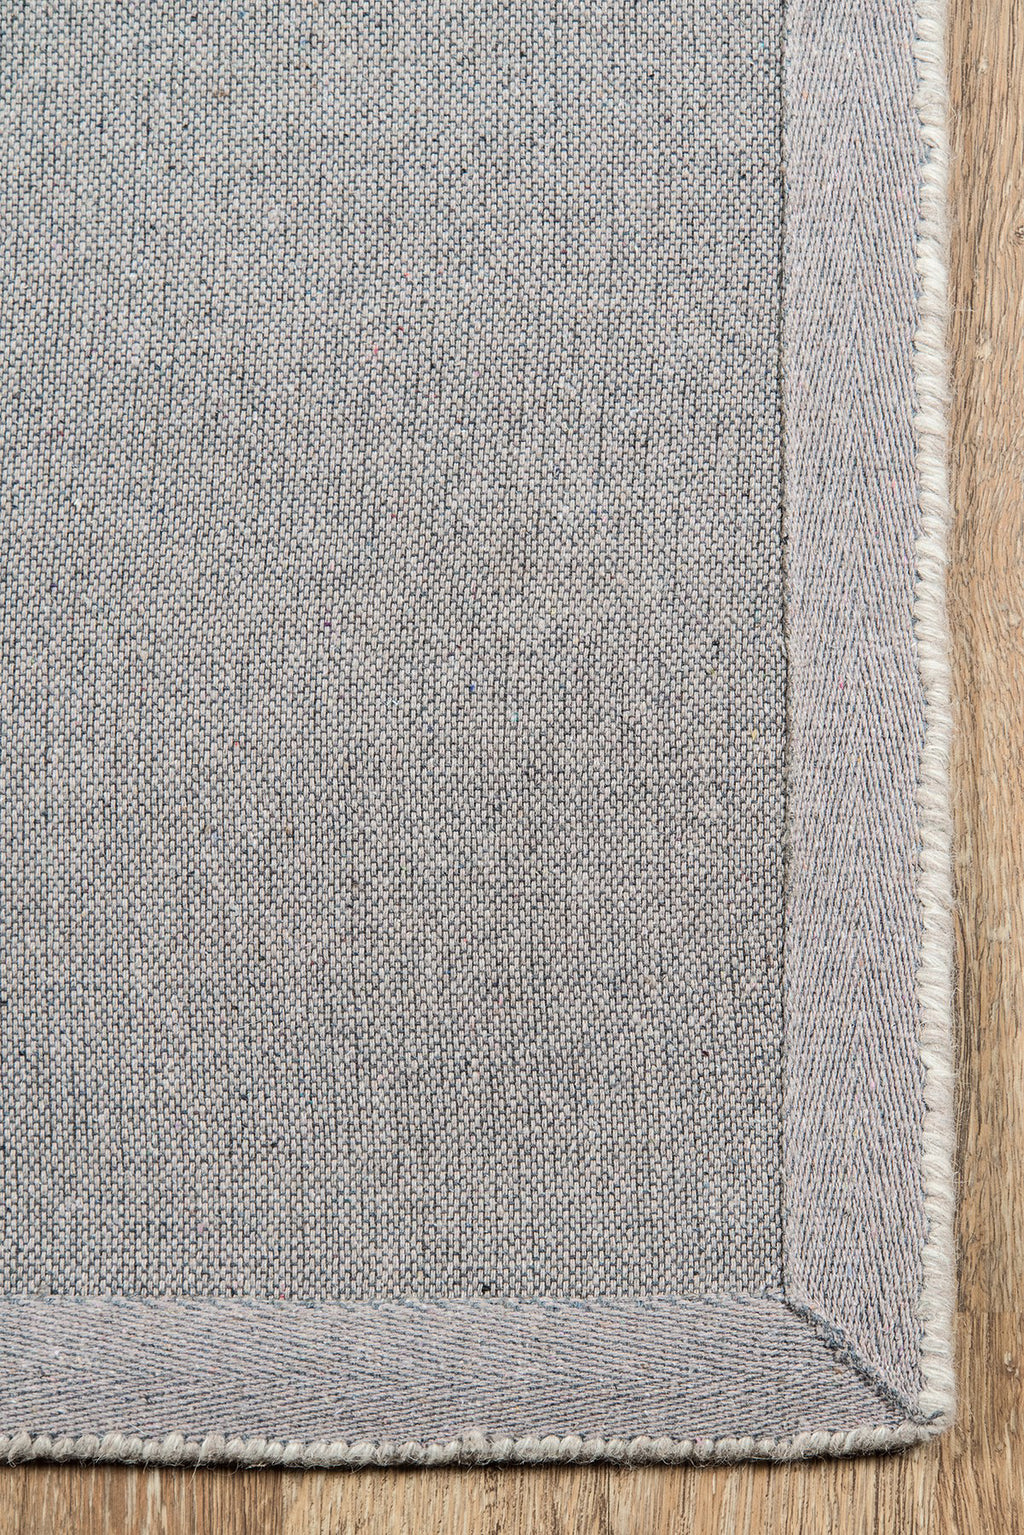 Momeni Taos TAO-C Pewter Area Rug by Broadloom Runner Image Feature